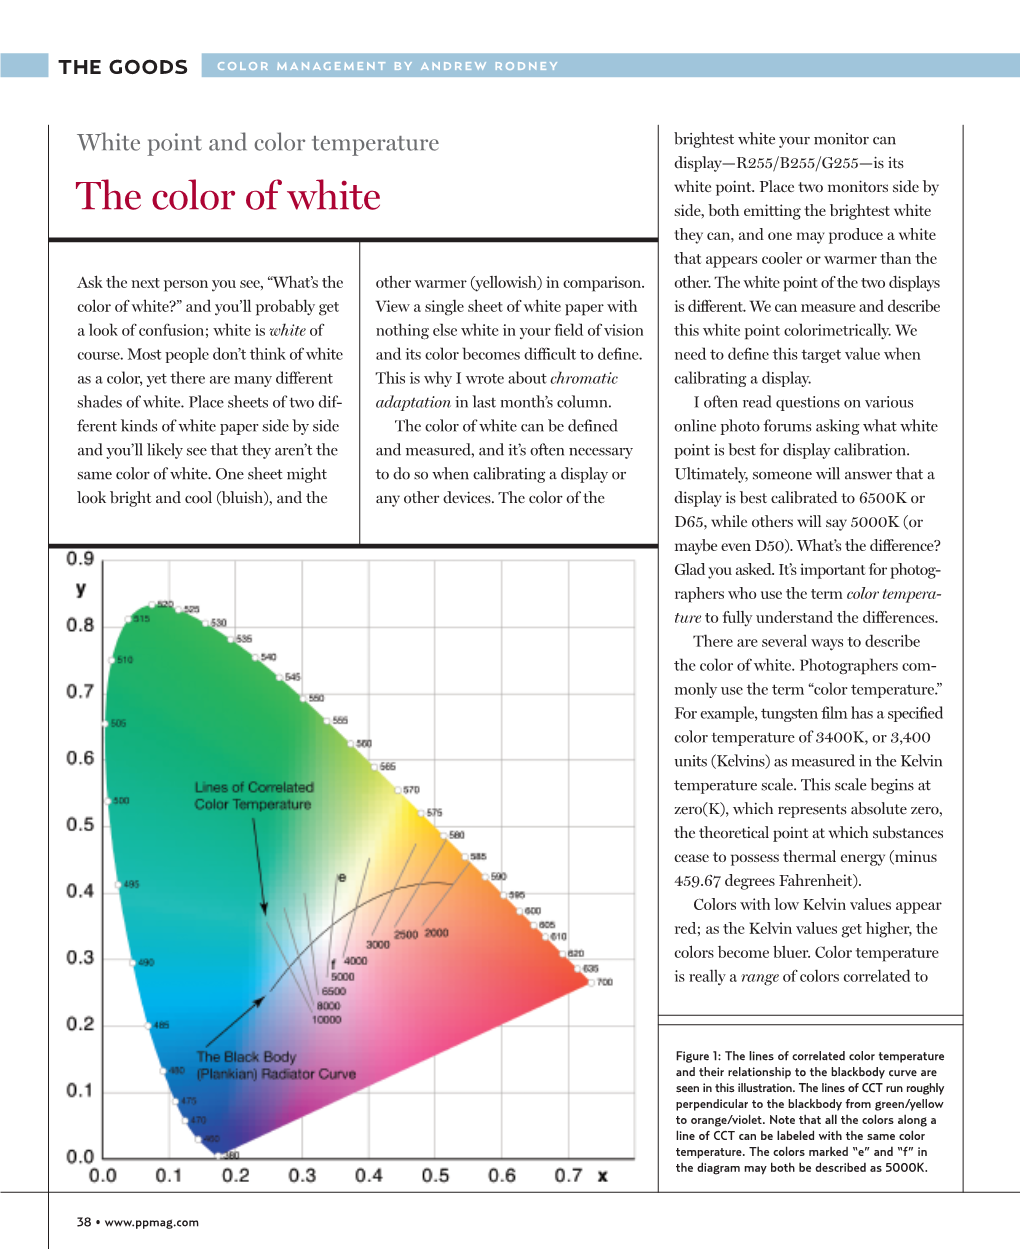 The Color of White